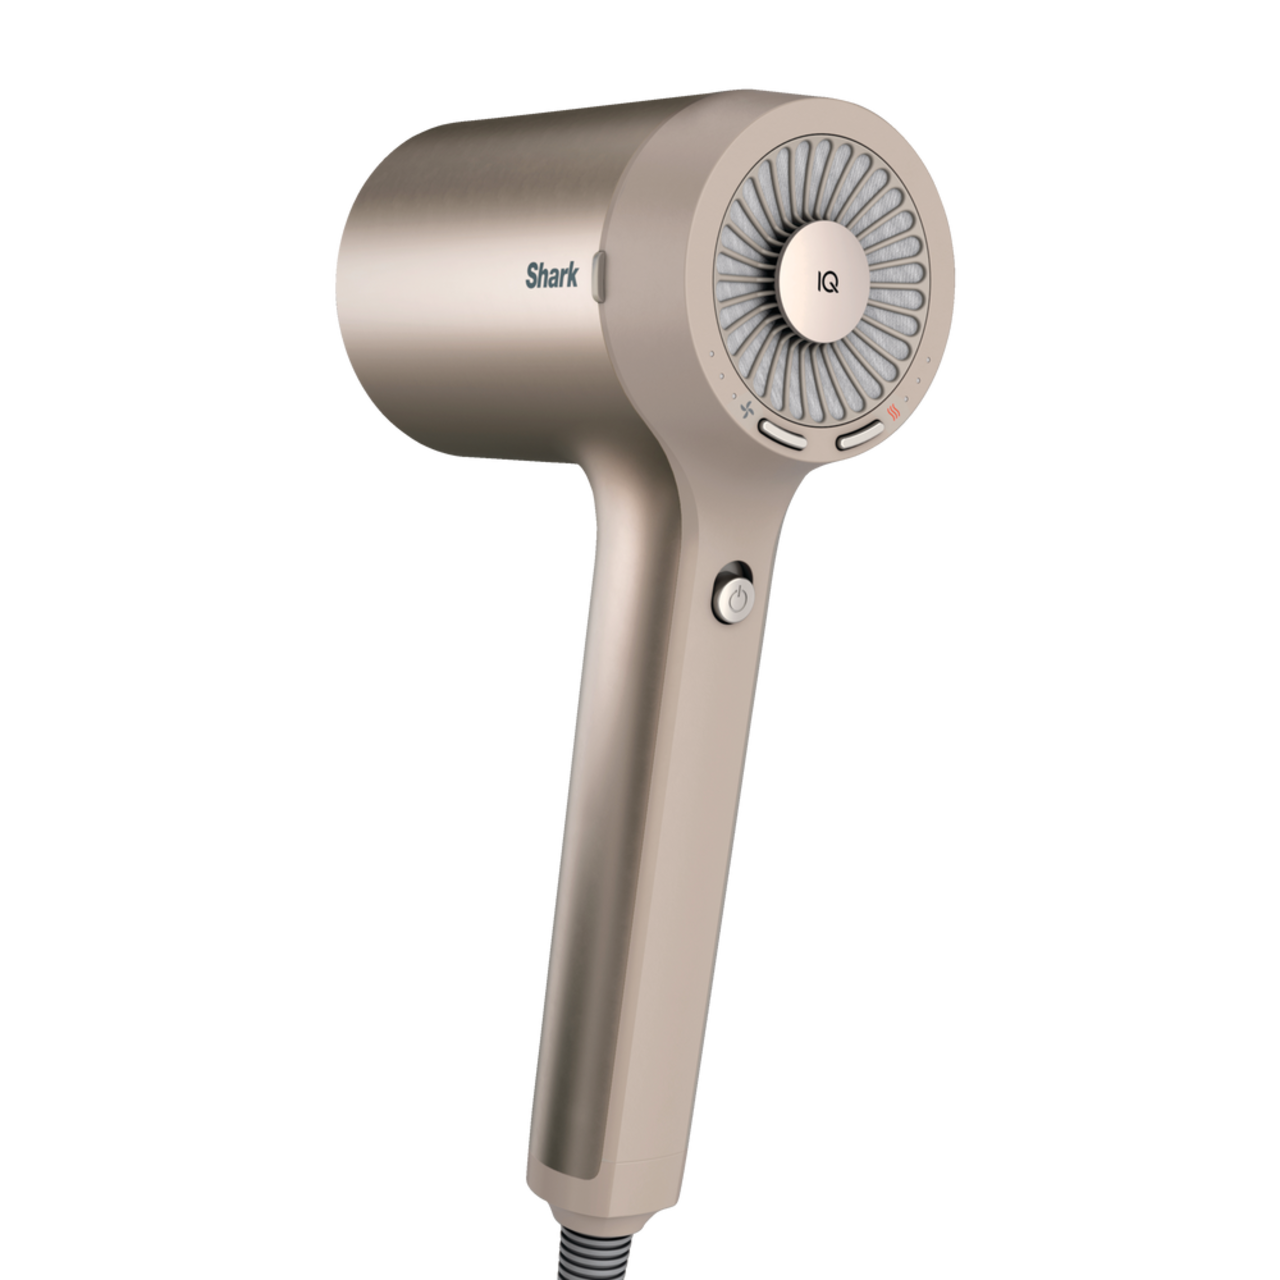 Shark HyperAIR IQ Technology Fast-Drying Ionic Hair Dryer with